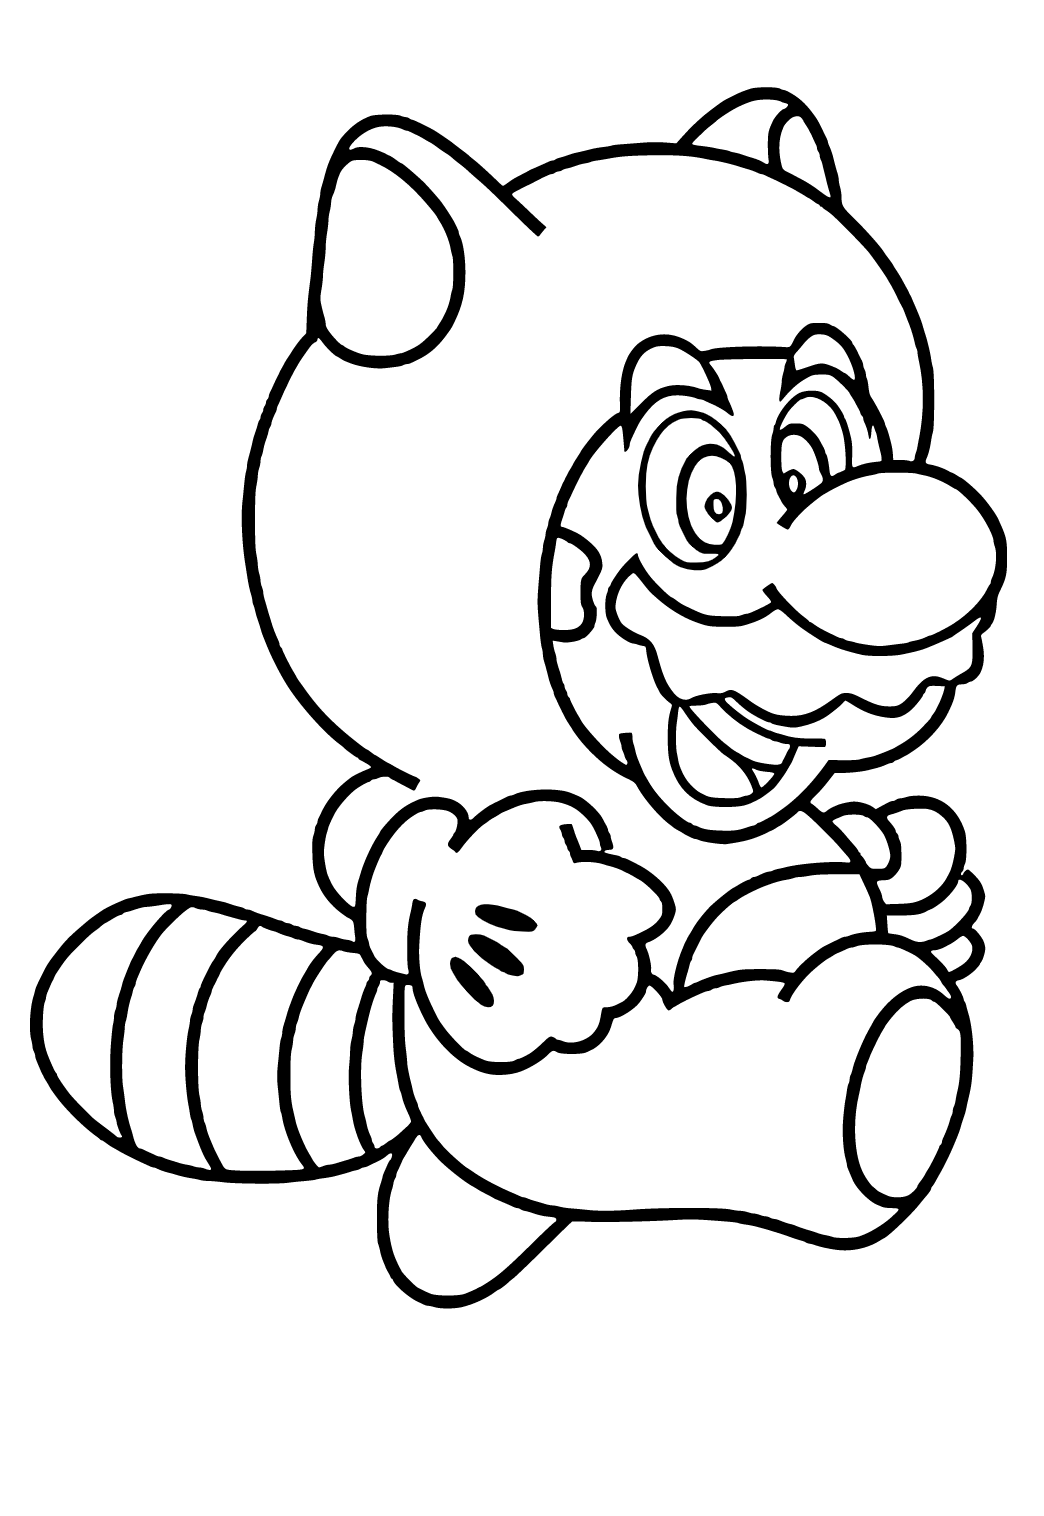 Free printable funny mario coloring page sheet and picture for adults and kids girls and boys